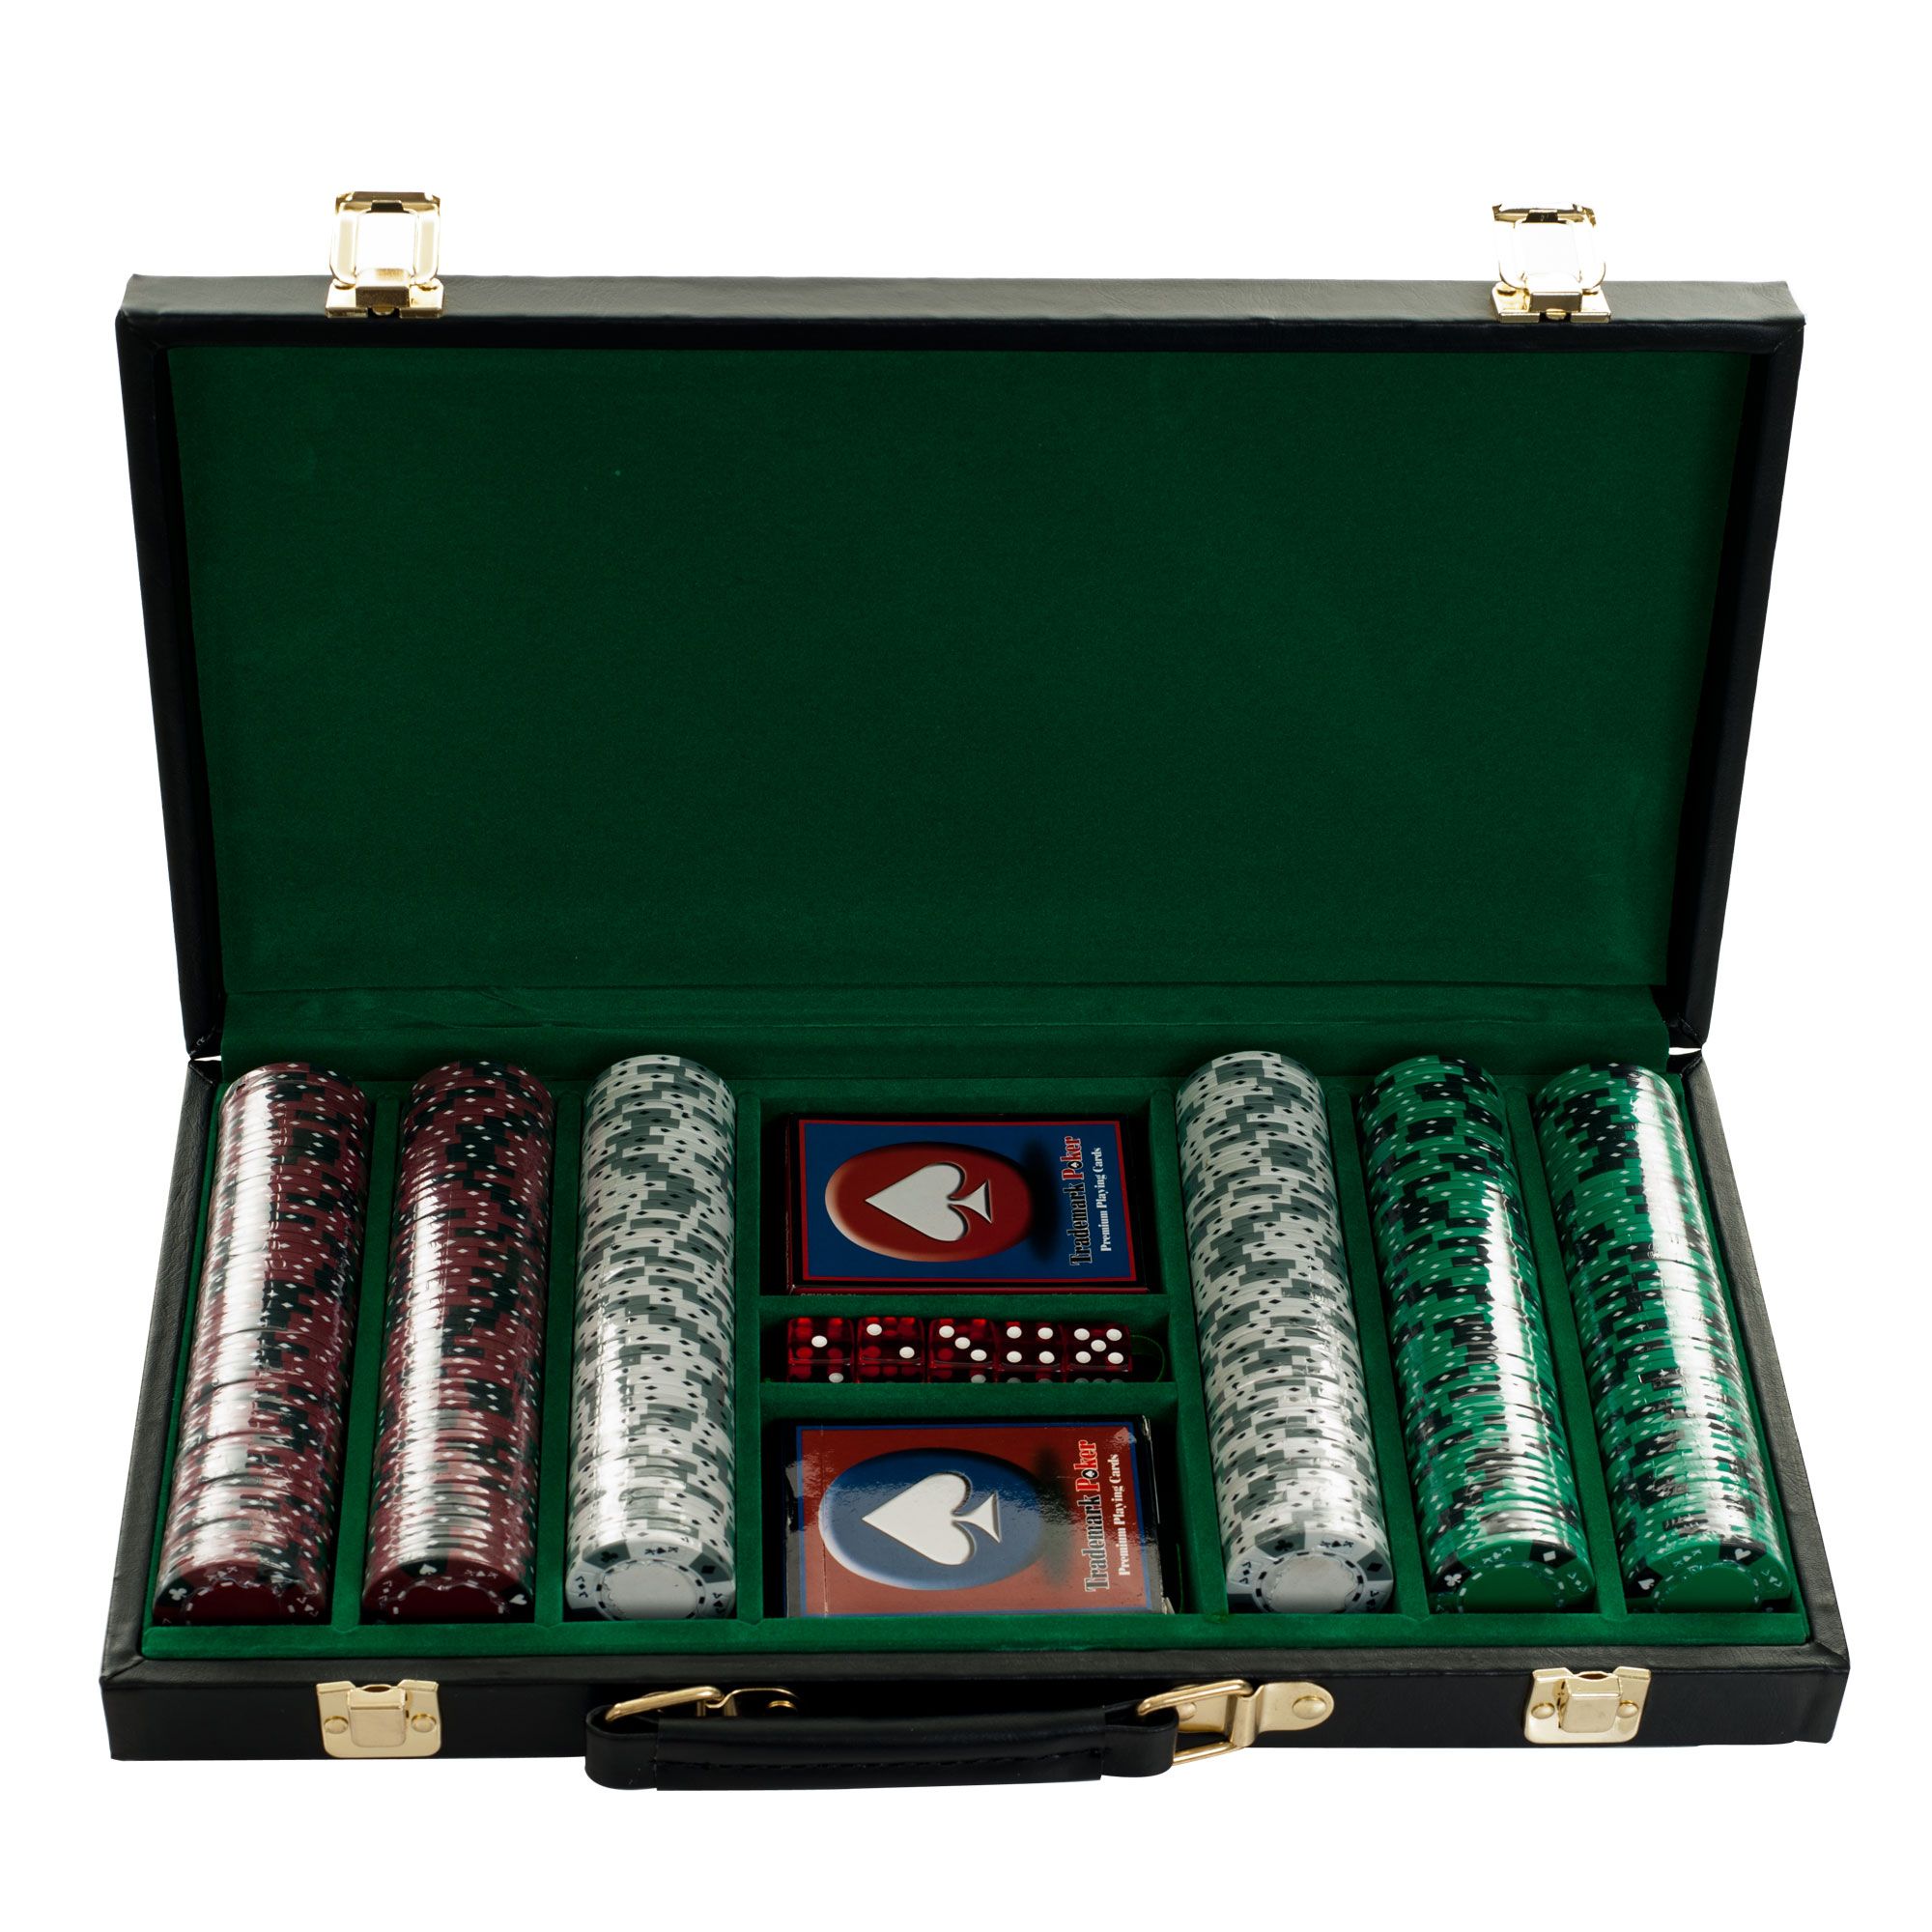 Trademark Global 300 14g Tri Color Ace/King Suited Chips in Aluminum Case